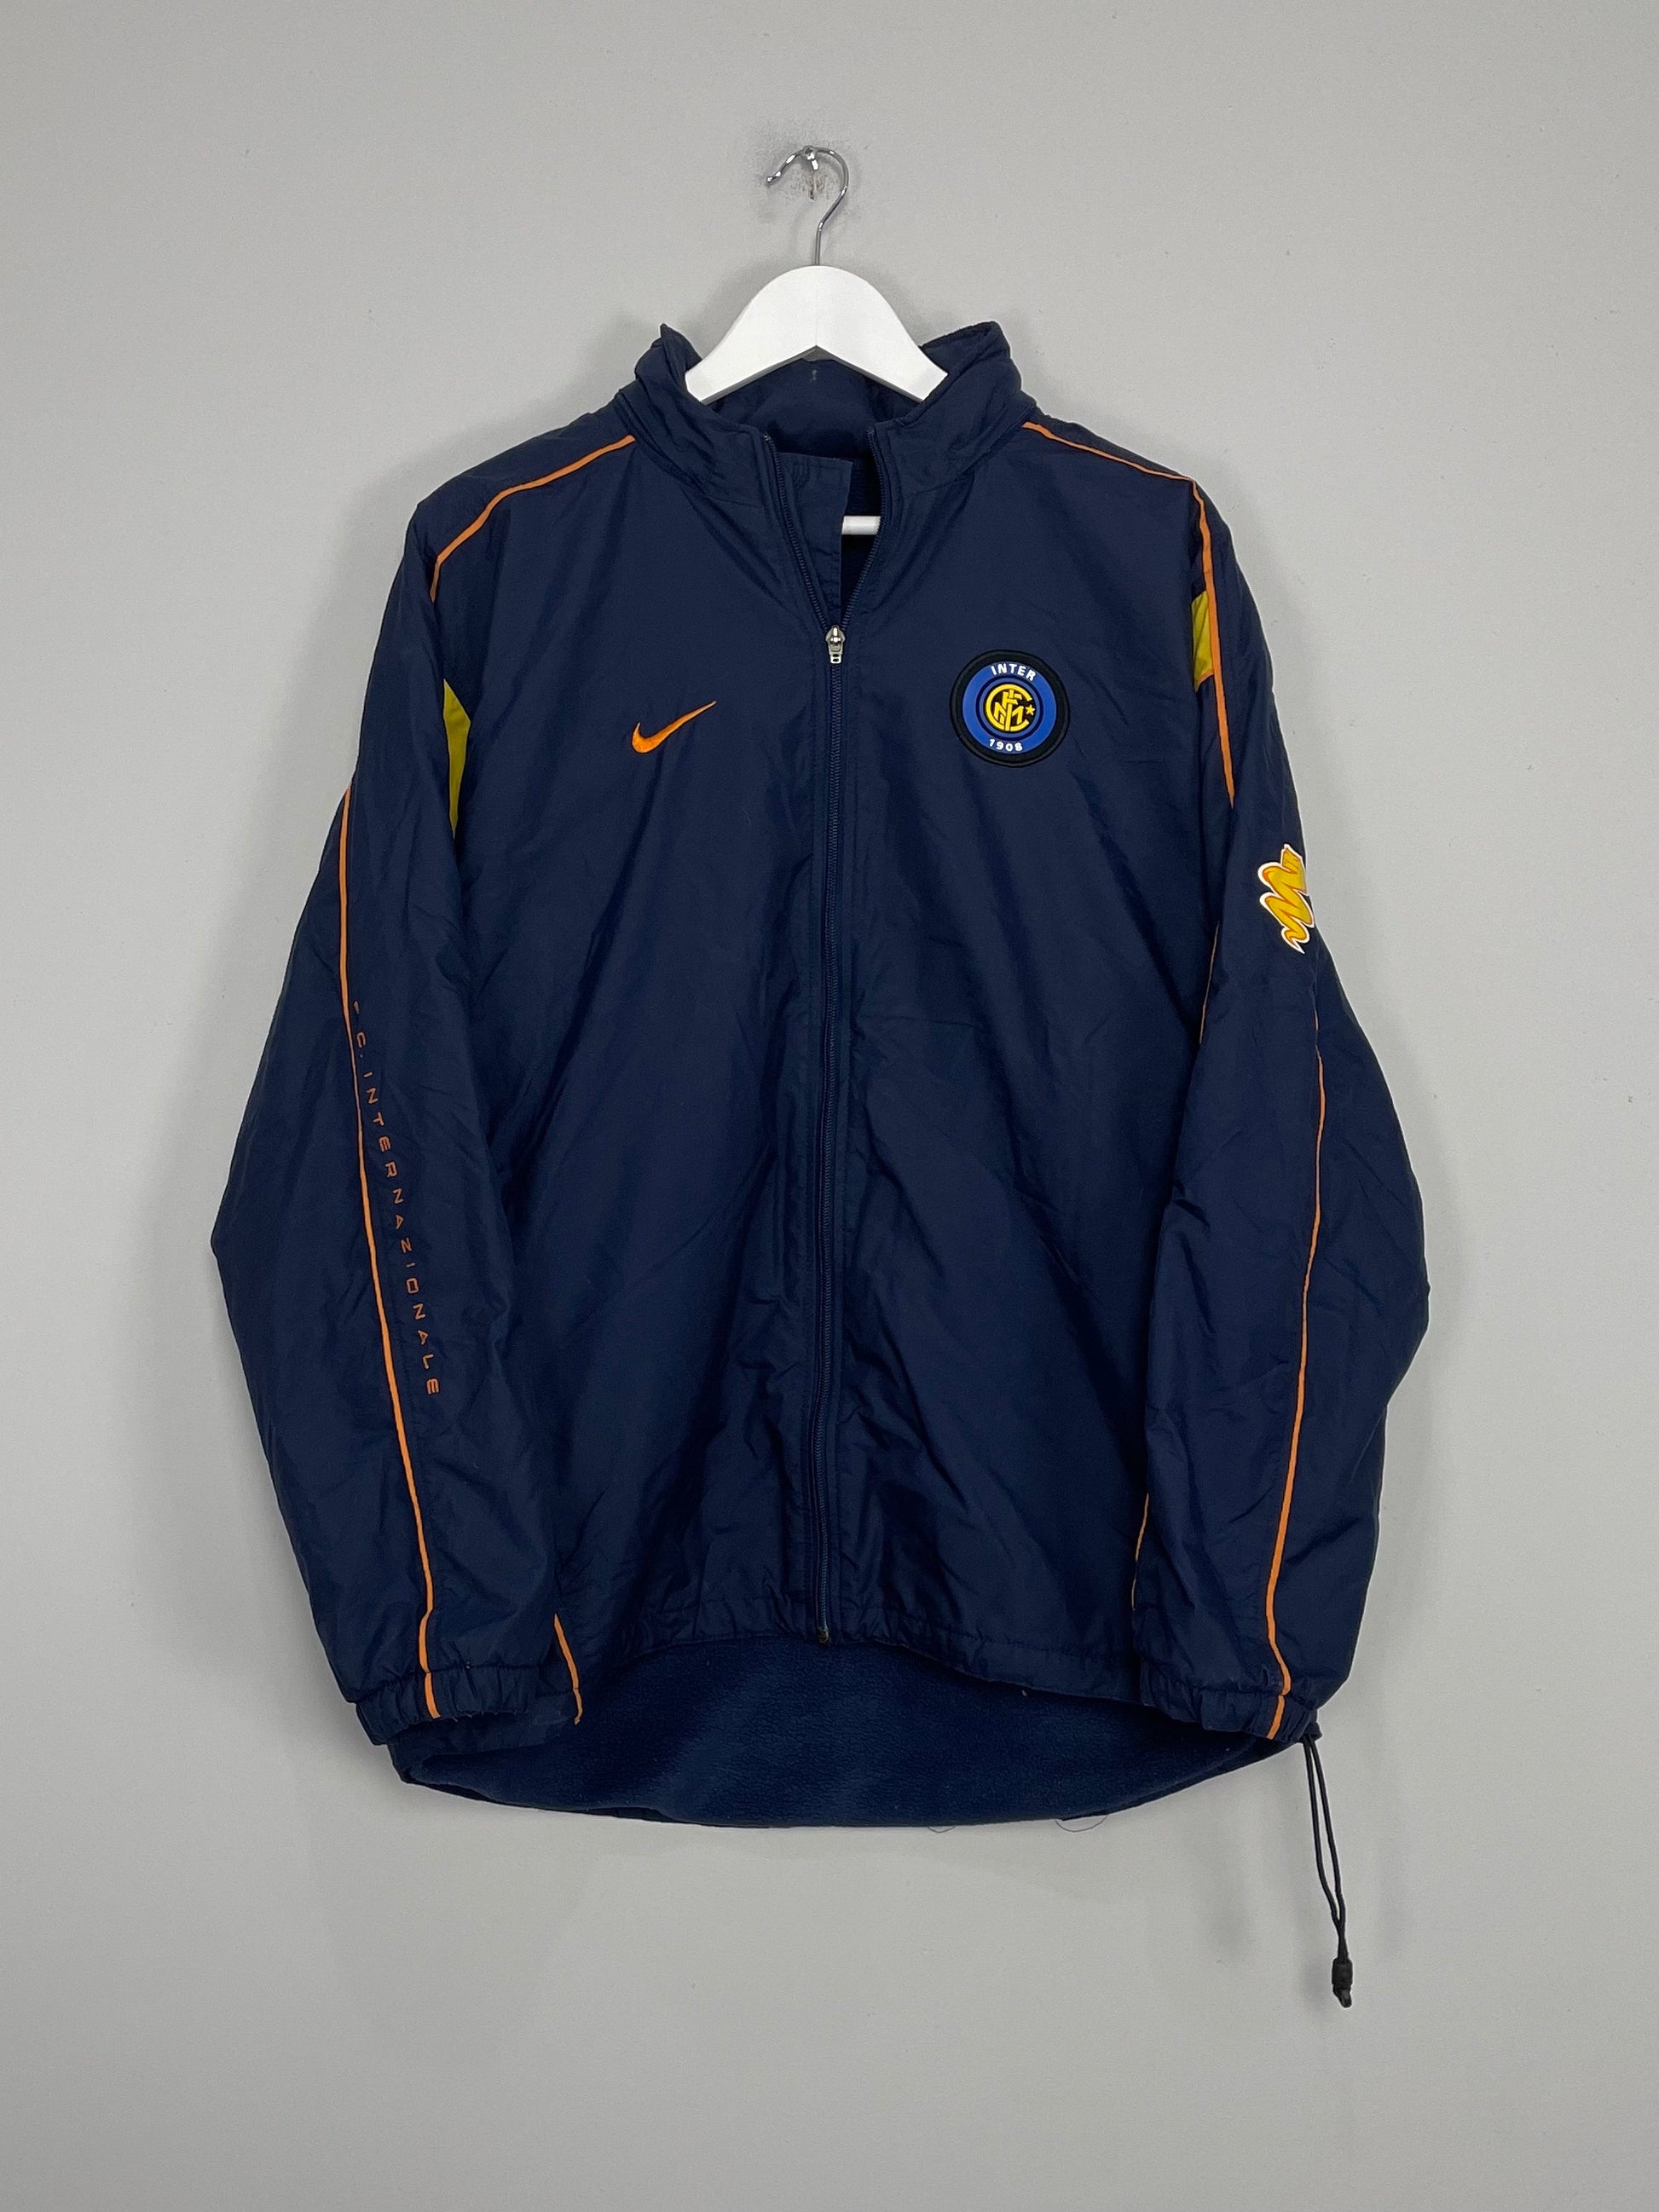 Image of the Inter Milan jacket from the 2003/04 season